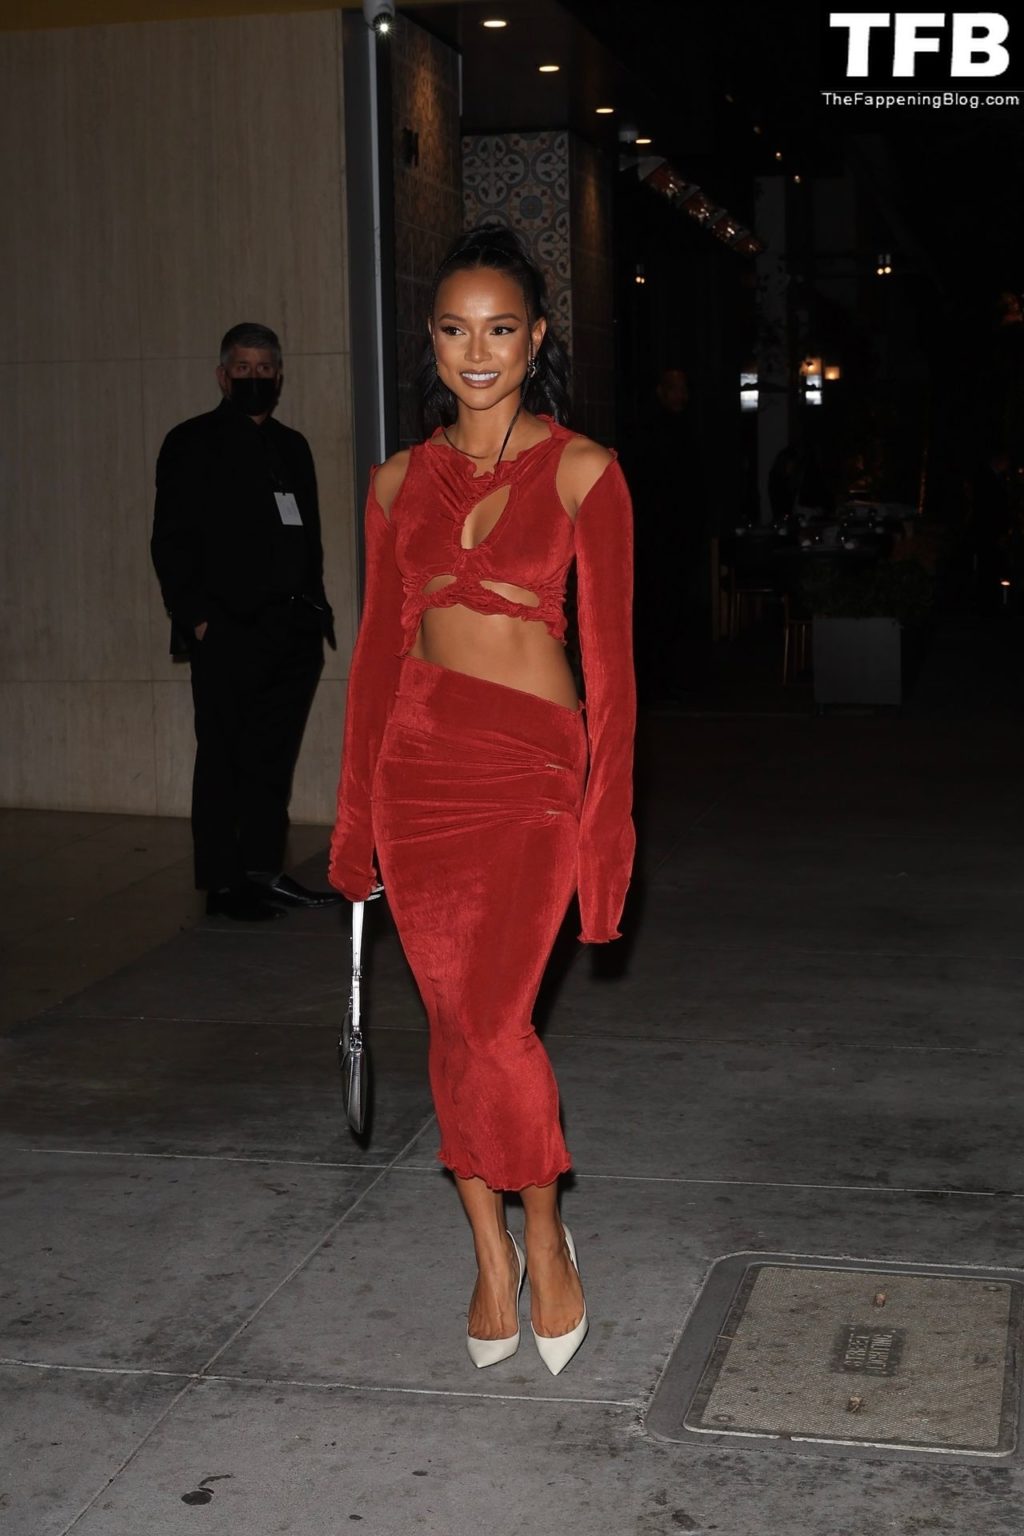 Karrueche Tran Sexy The Fappening Blog 2 1 1024x1536 - Karrueche Tran Shows Her Pokies in a Red Dress at The Hollywood Reporter’s Oscar Nominees Night (68 Photos)